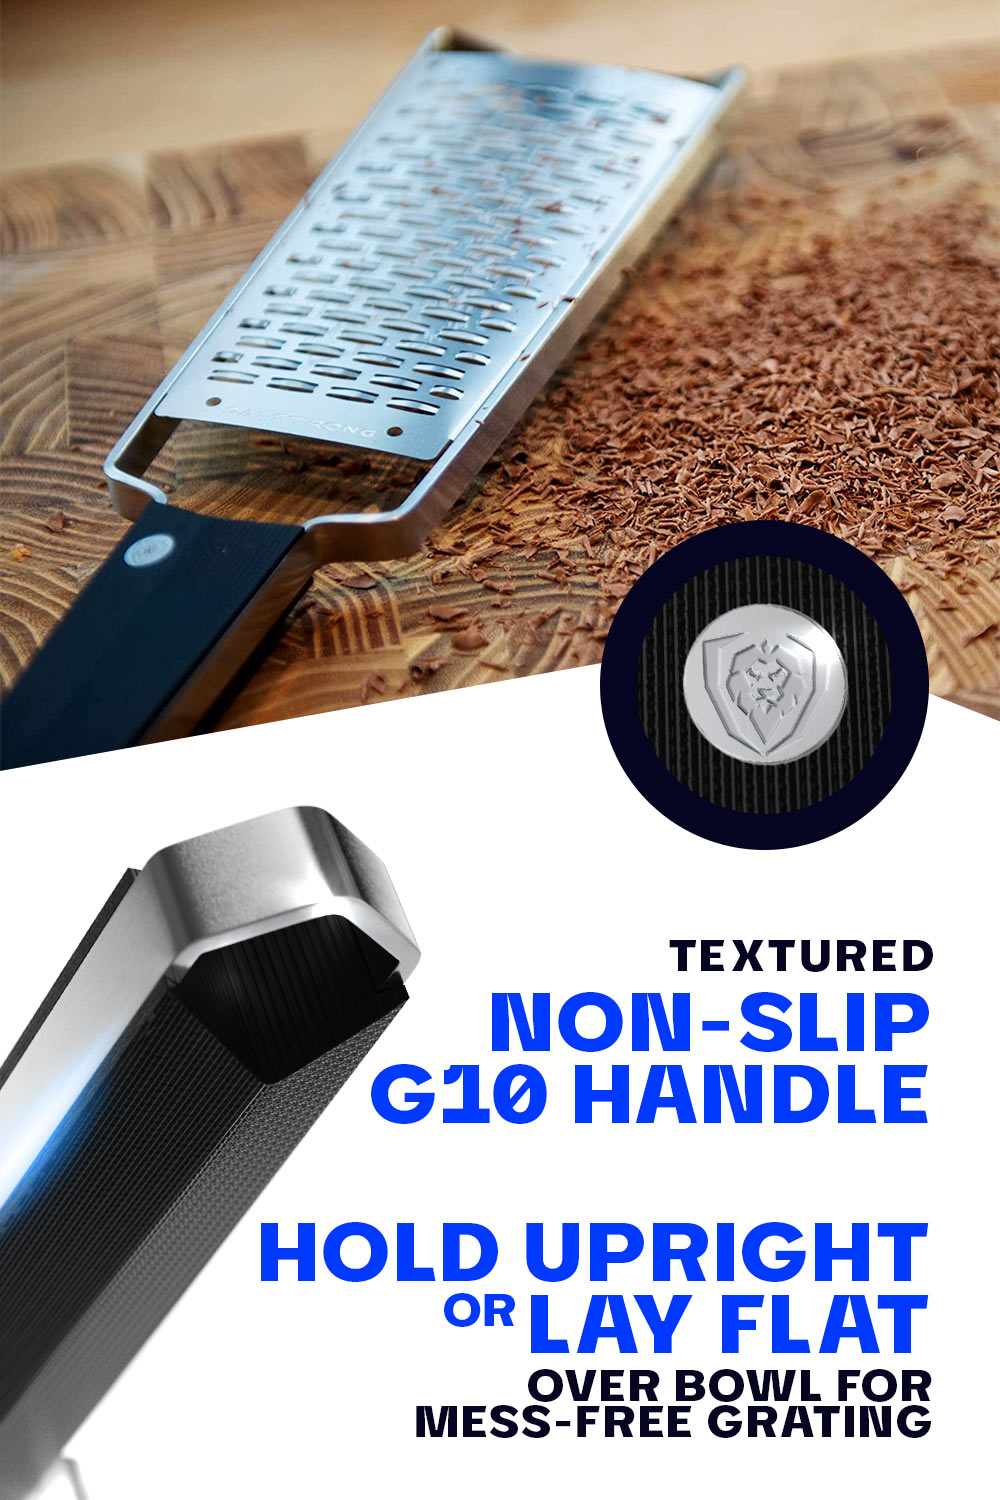 Dalstrong professional ribbon wide cheese grater showcasing it's non-slip G10 handle.